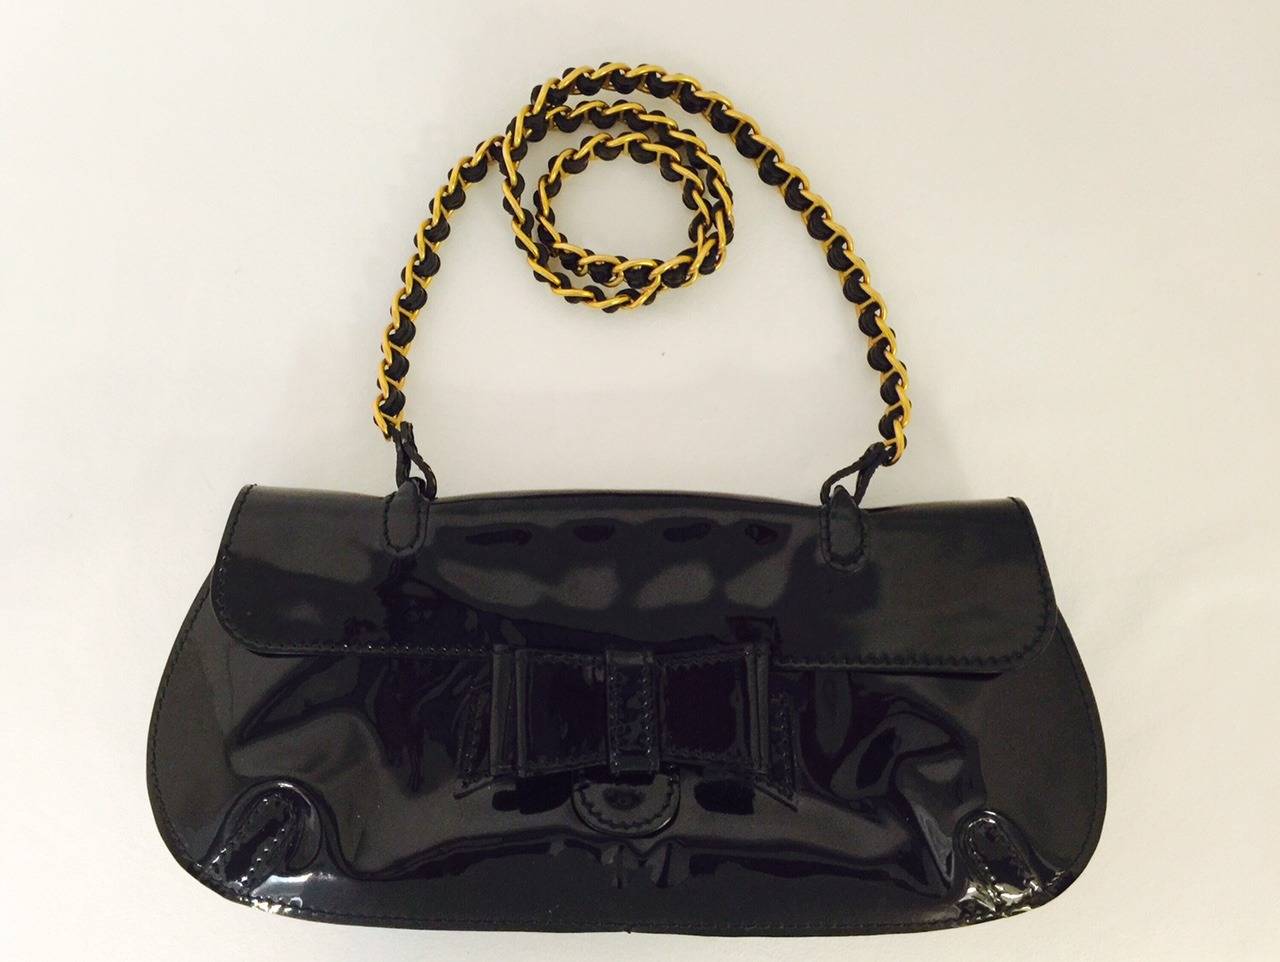 Patent Leather Shoulder Bag With Woven Chain Strap is decidedly Valentino!  Feminine, flirty?  But of course!  Features sumptuous black patent leather, snap closure and iconic luxurious bow on the front.  Black patent woven chain strap is the